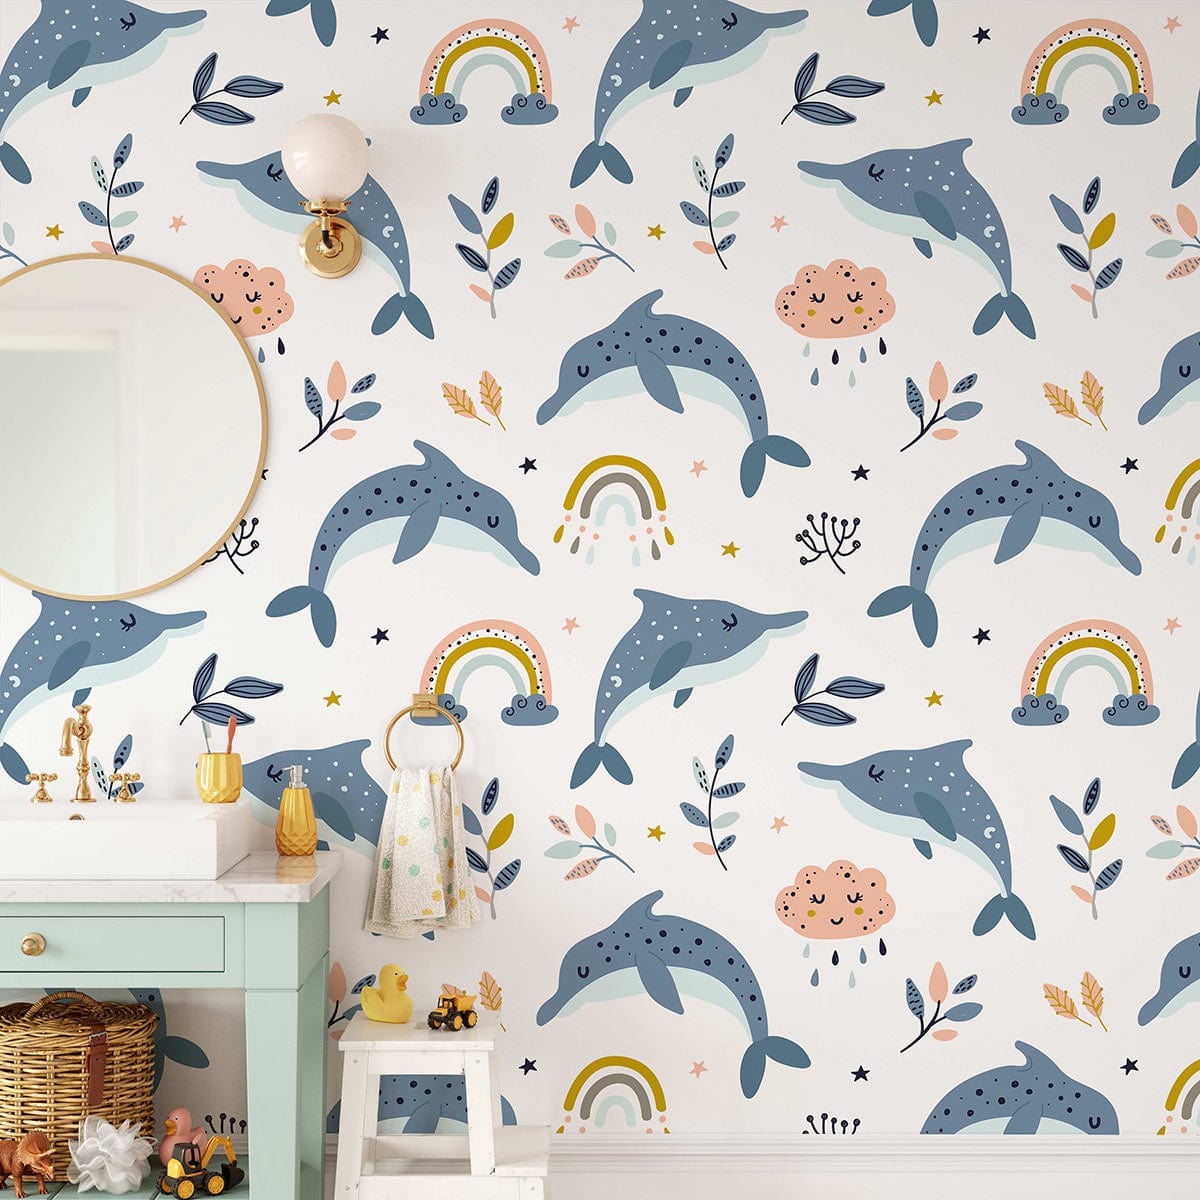 decorative wall painting of a blue dolphin dreaming between leaves